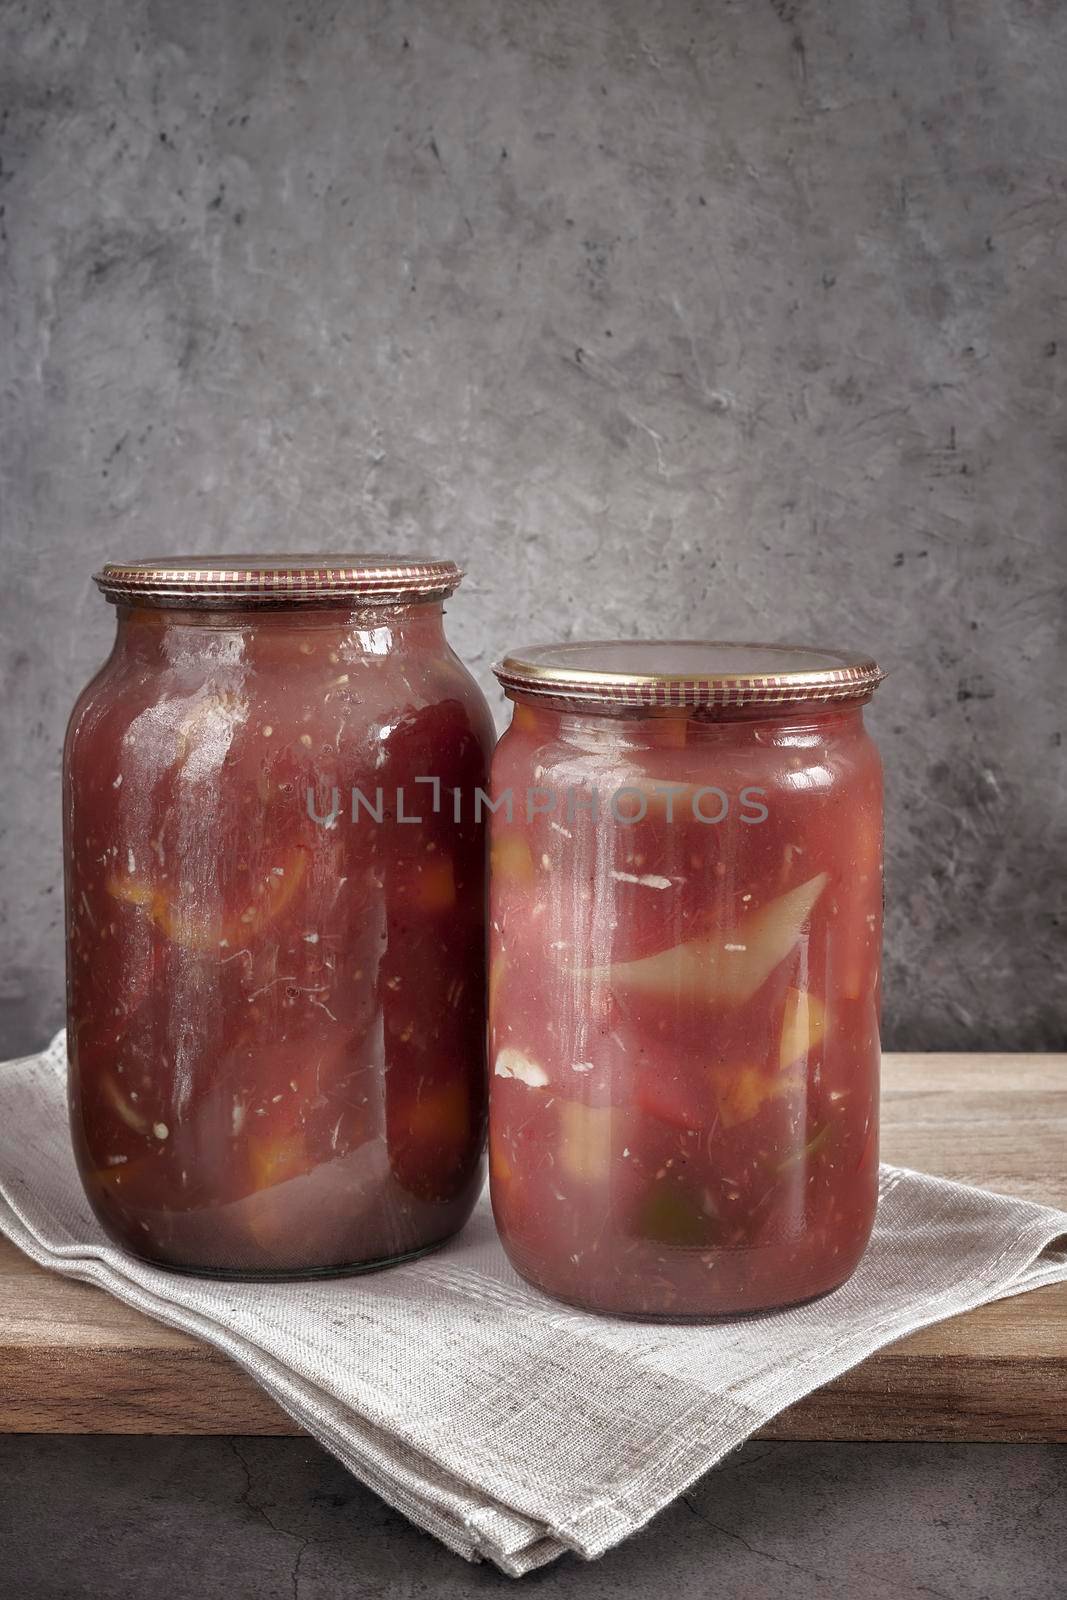 Home canning: canned bell peppers in glass jars by georgina198